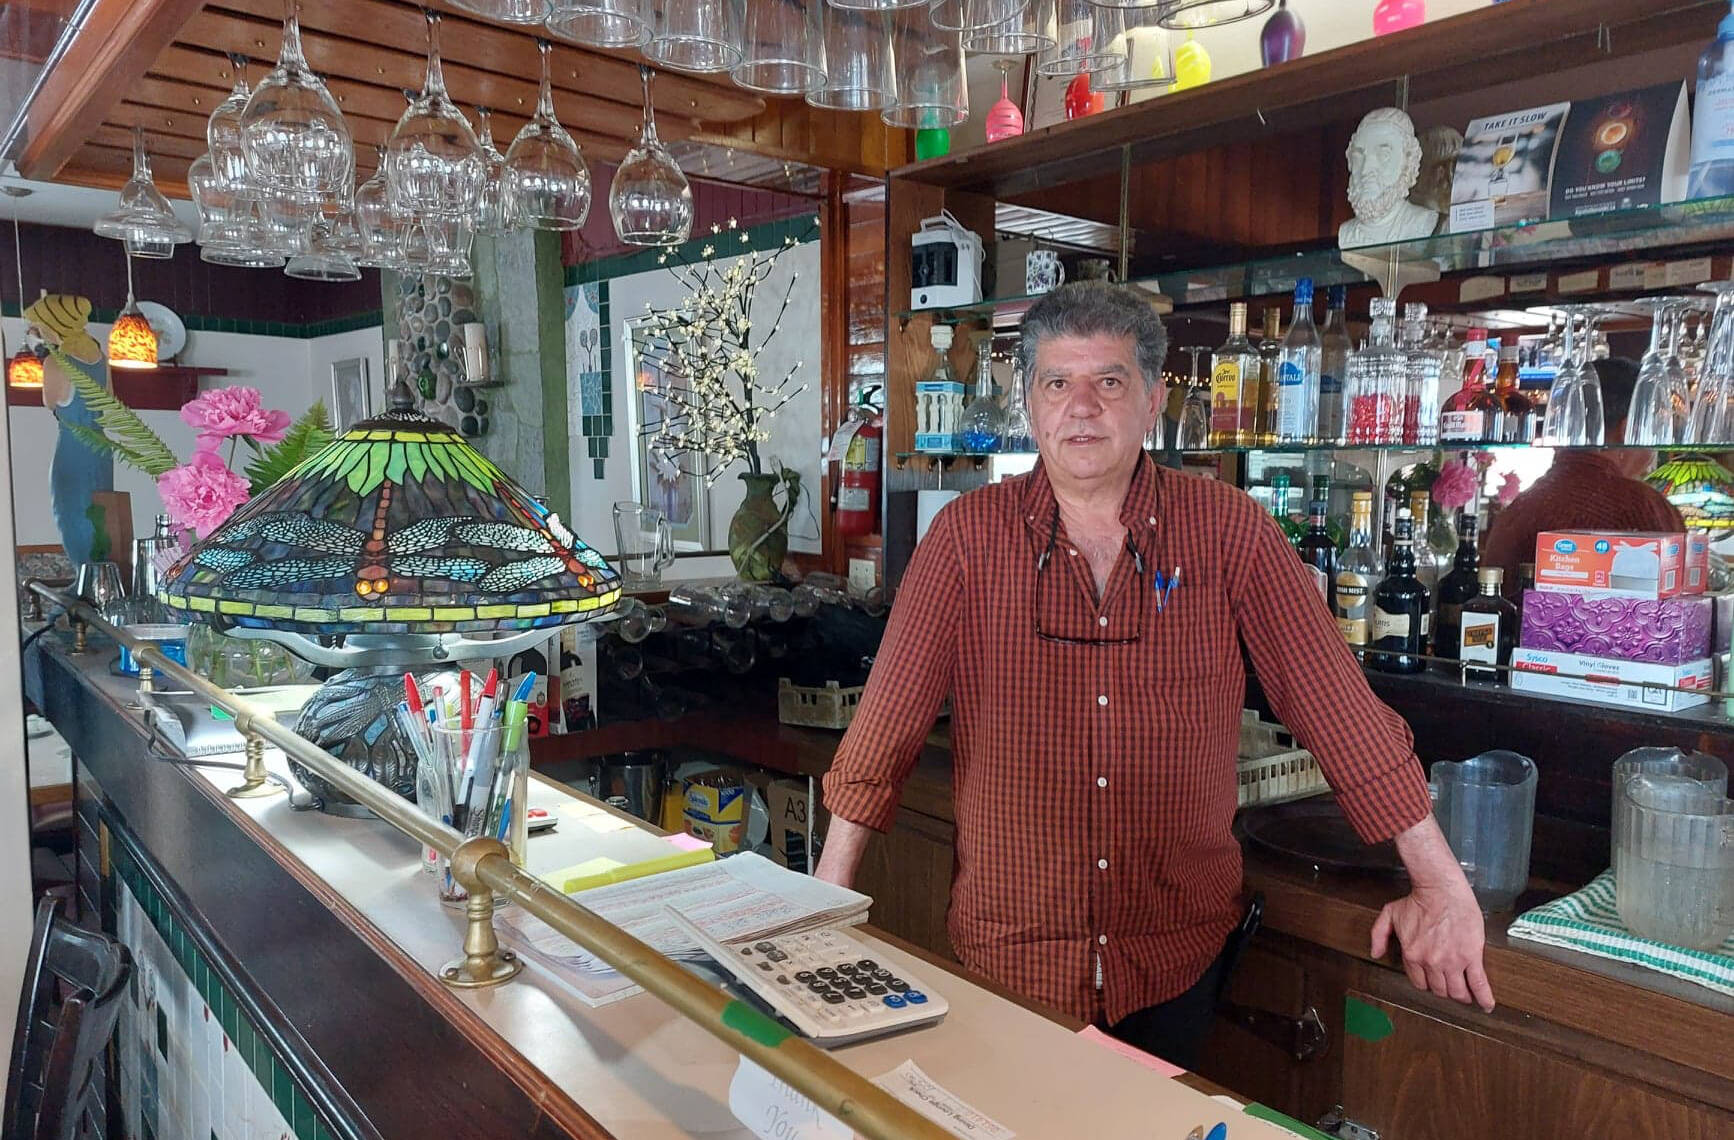 Fotis Garoufalis has worked at Homer Restaurant for 33 years and said it will be an emotional day when it closes for good on Friday, June 10. (Eric J. Welsh/ Chilliwack Progress)